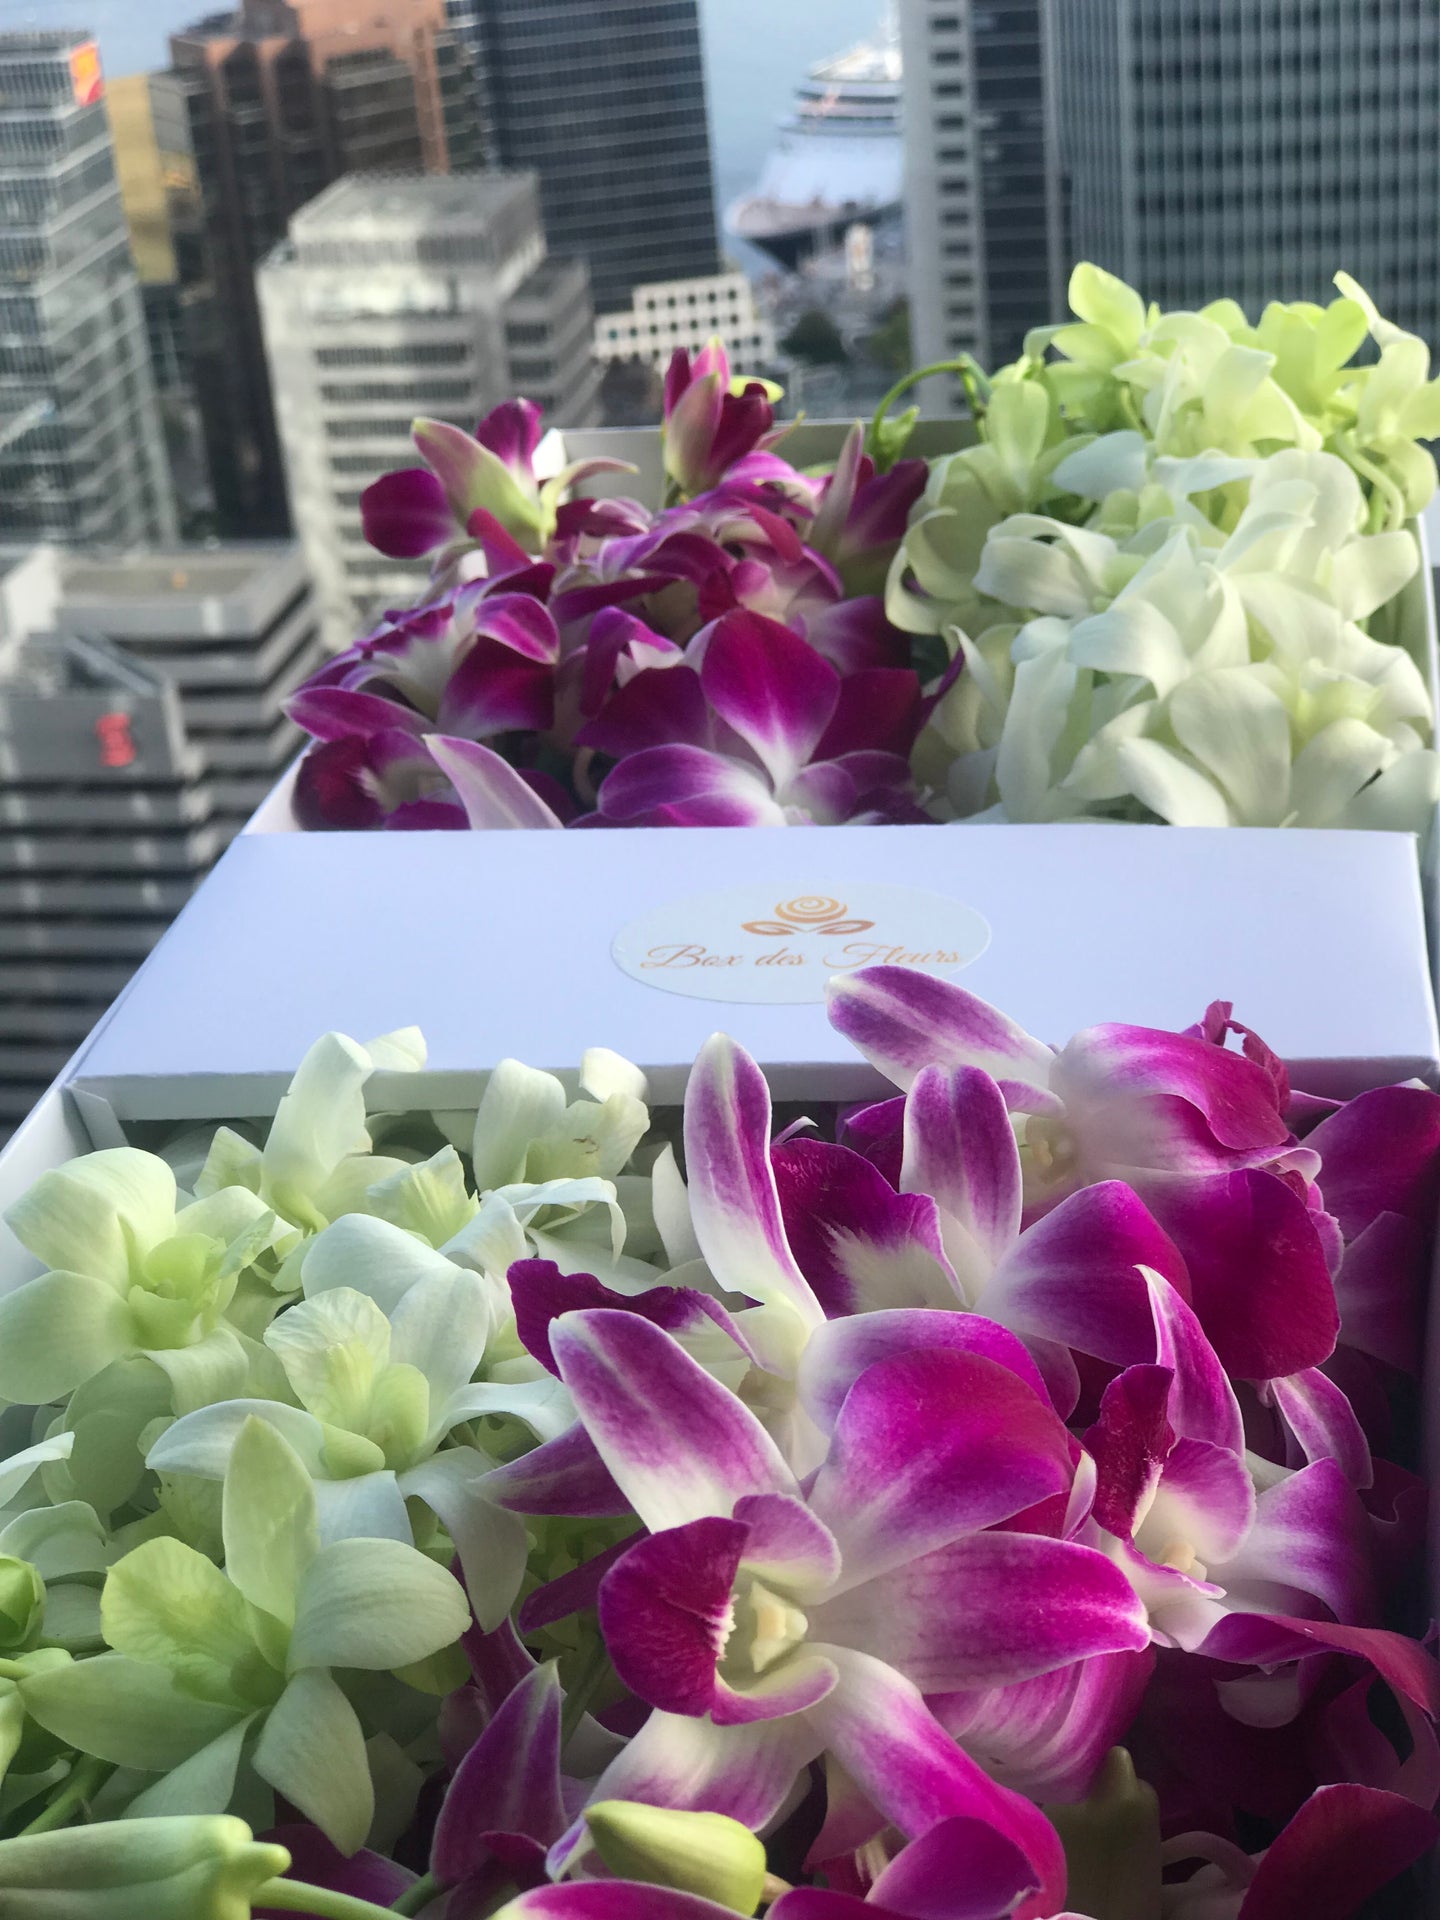 Close-up image of a pink and white orchid plant with multiple stems and lush green leaves in a marble box from Vancouver's Box Des Fleurs. The petals of the orchid are delicate and curved, with white centers and pink stripes. An elegant and stunning addition to any home or office.